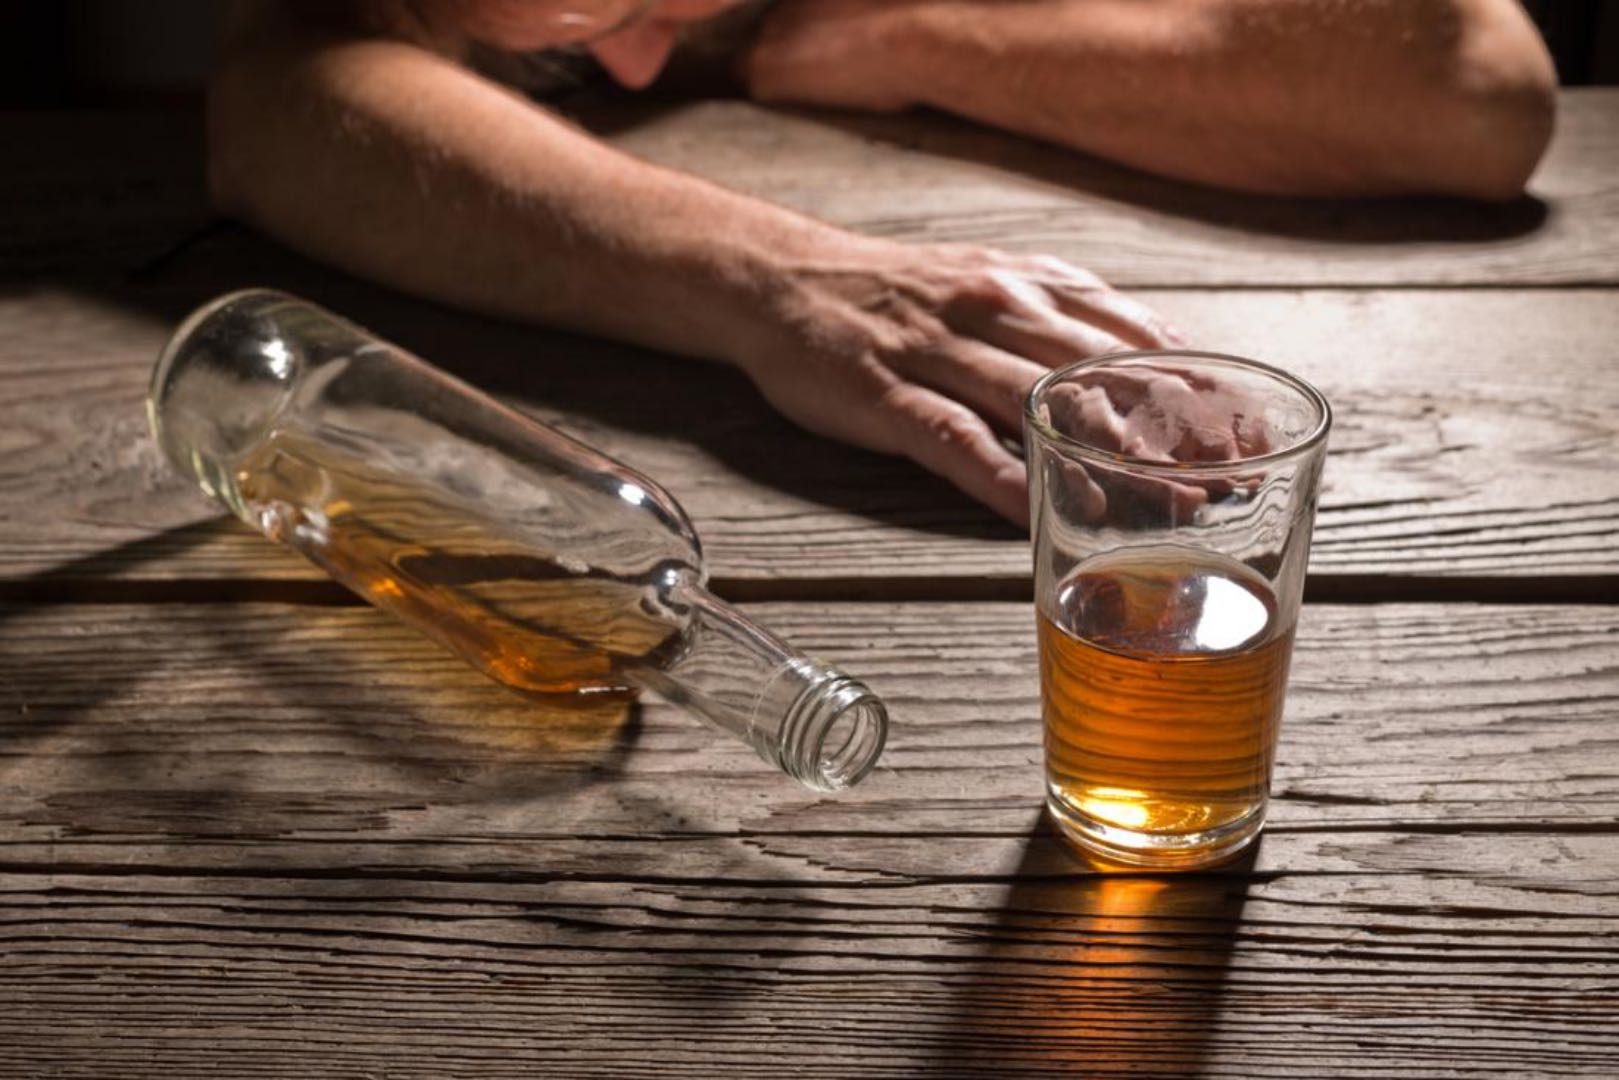 10 signs that your spouse may have a drinking problem